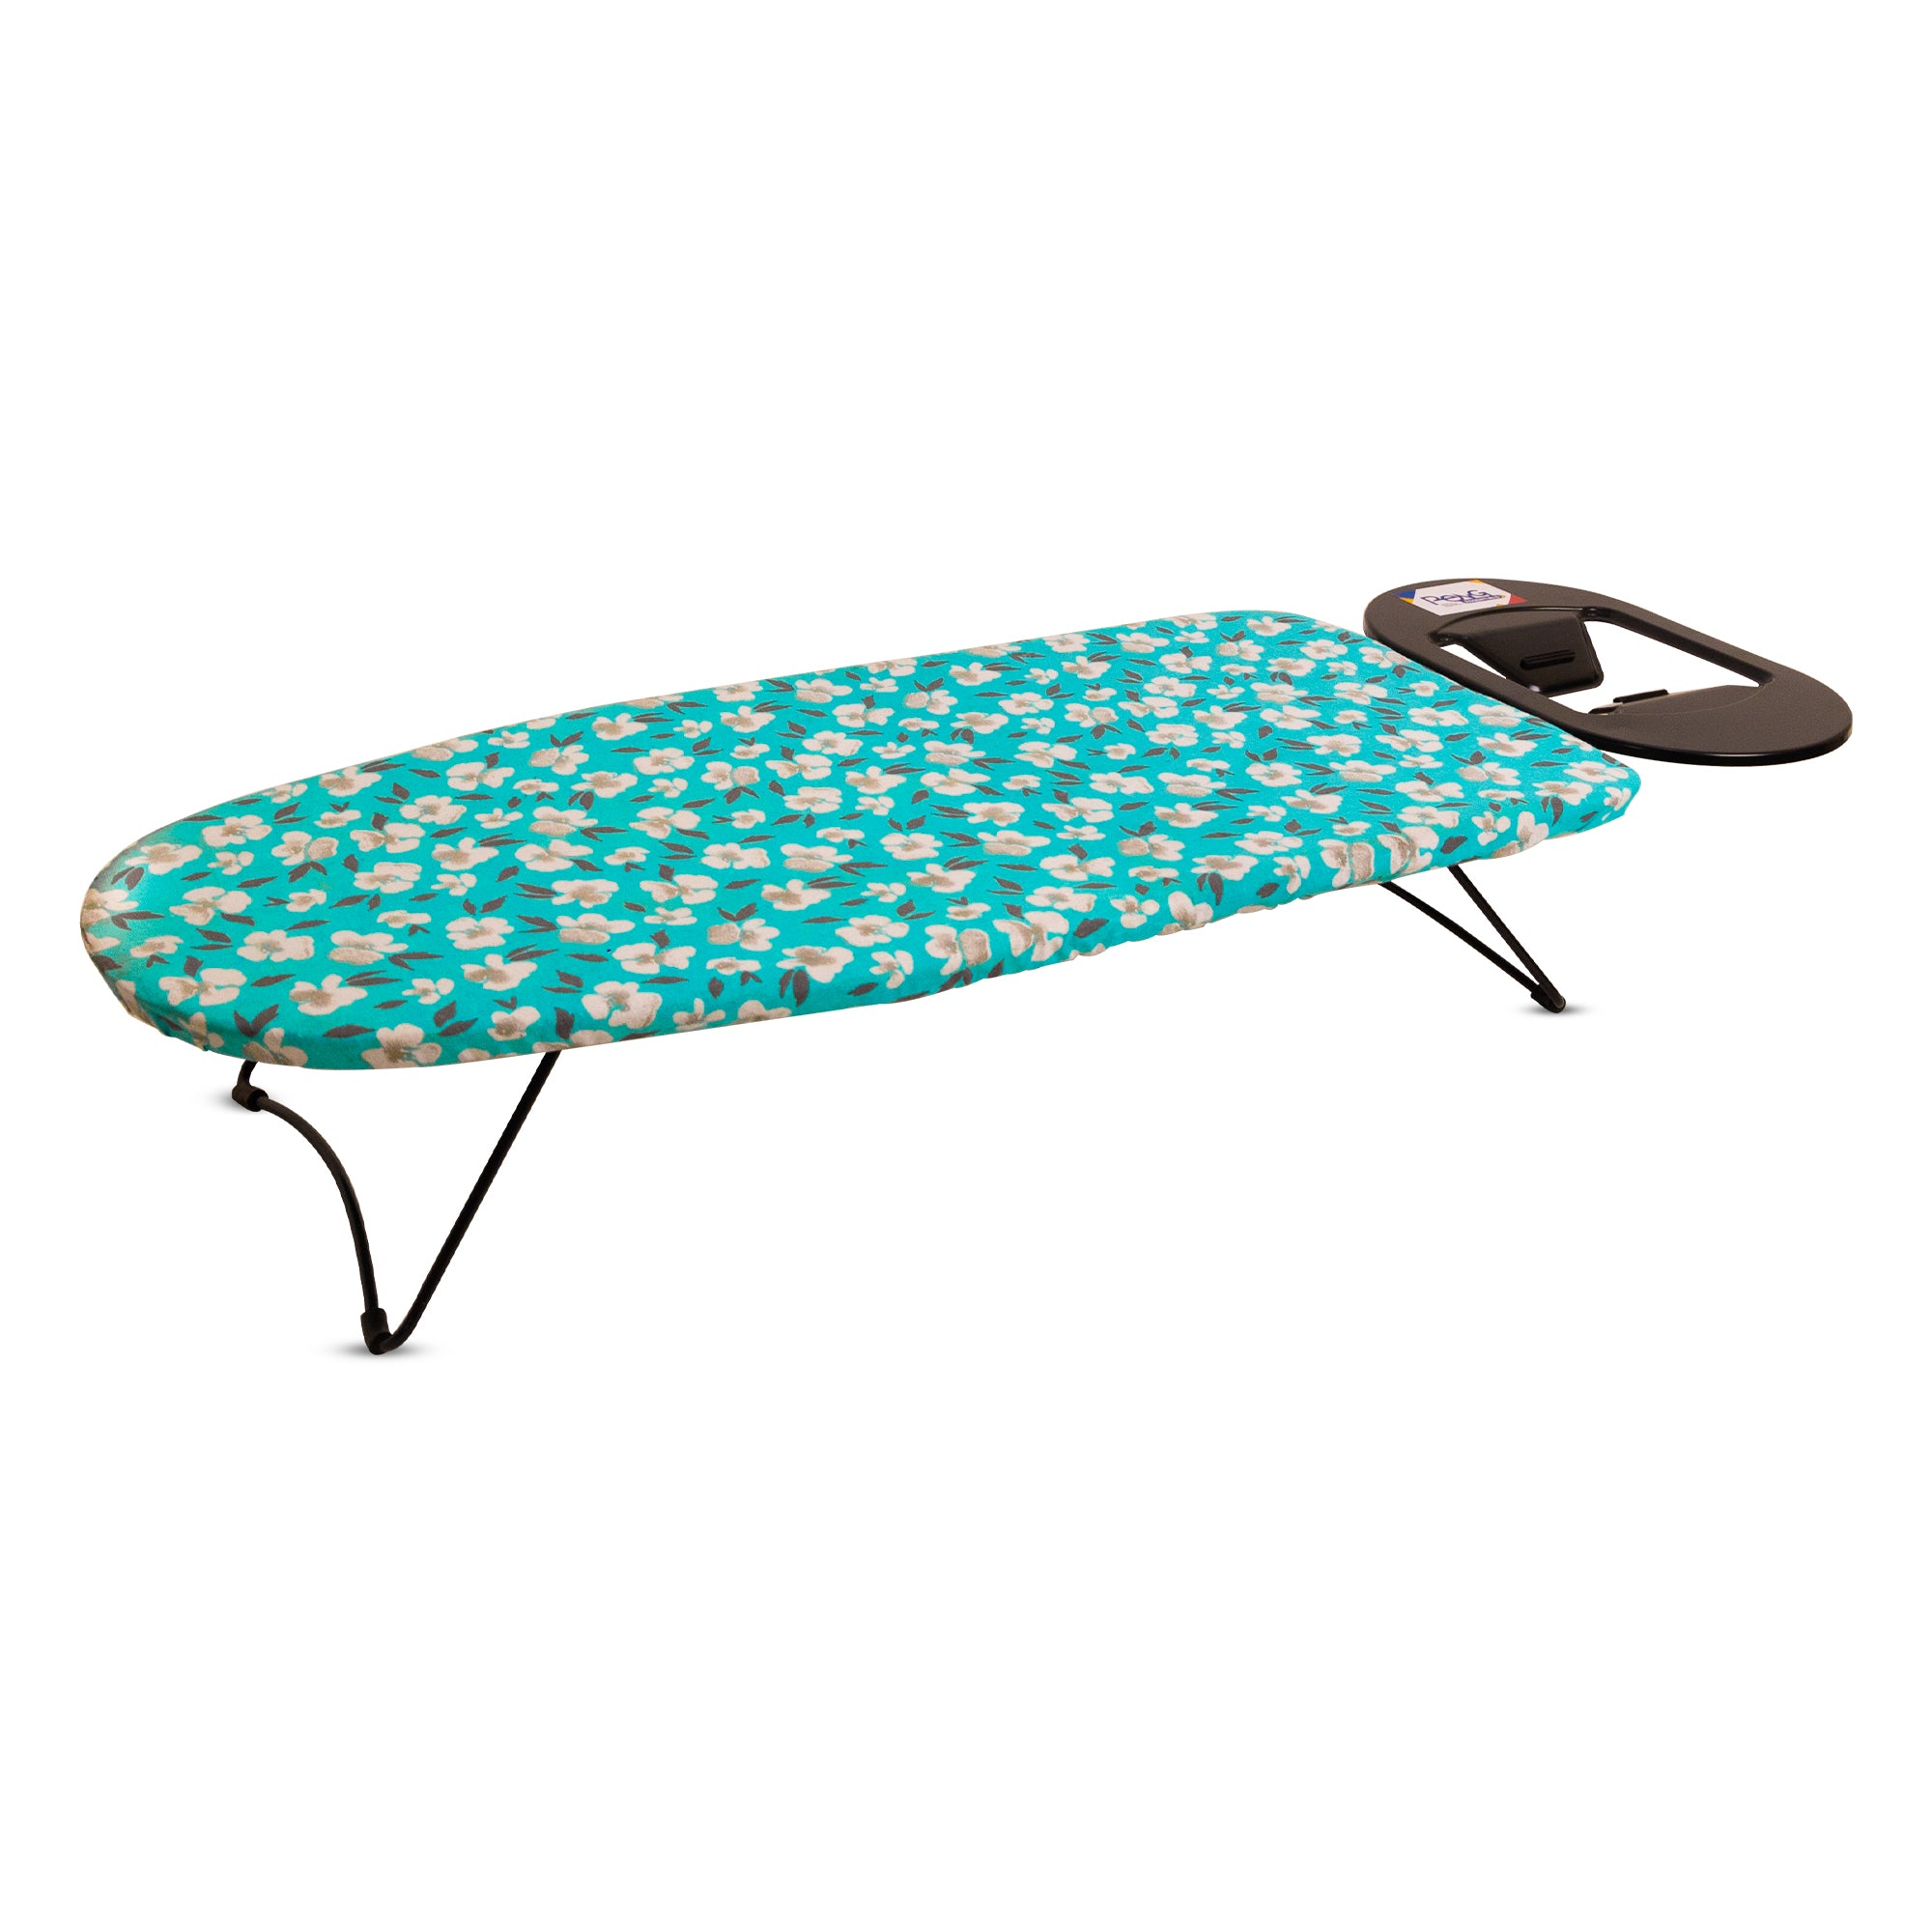 Zurich Tabletop Ironing Board | Foldable Tabletop Ironing Board with Iron Rest I Green